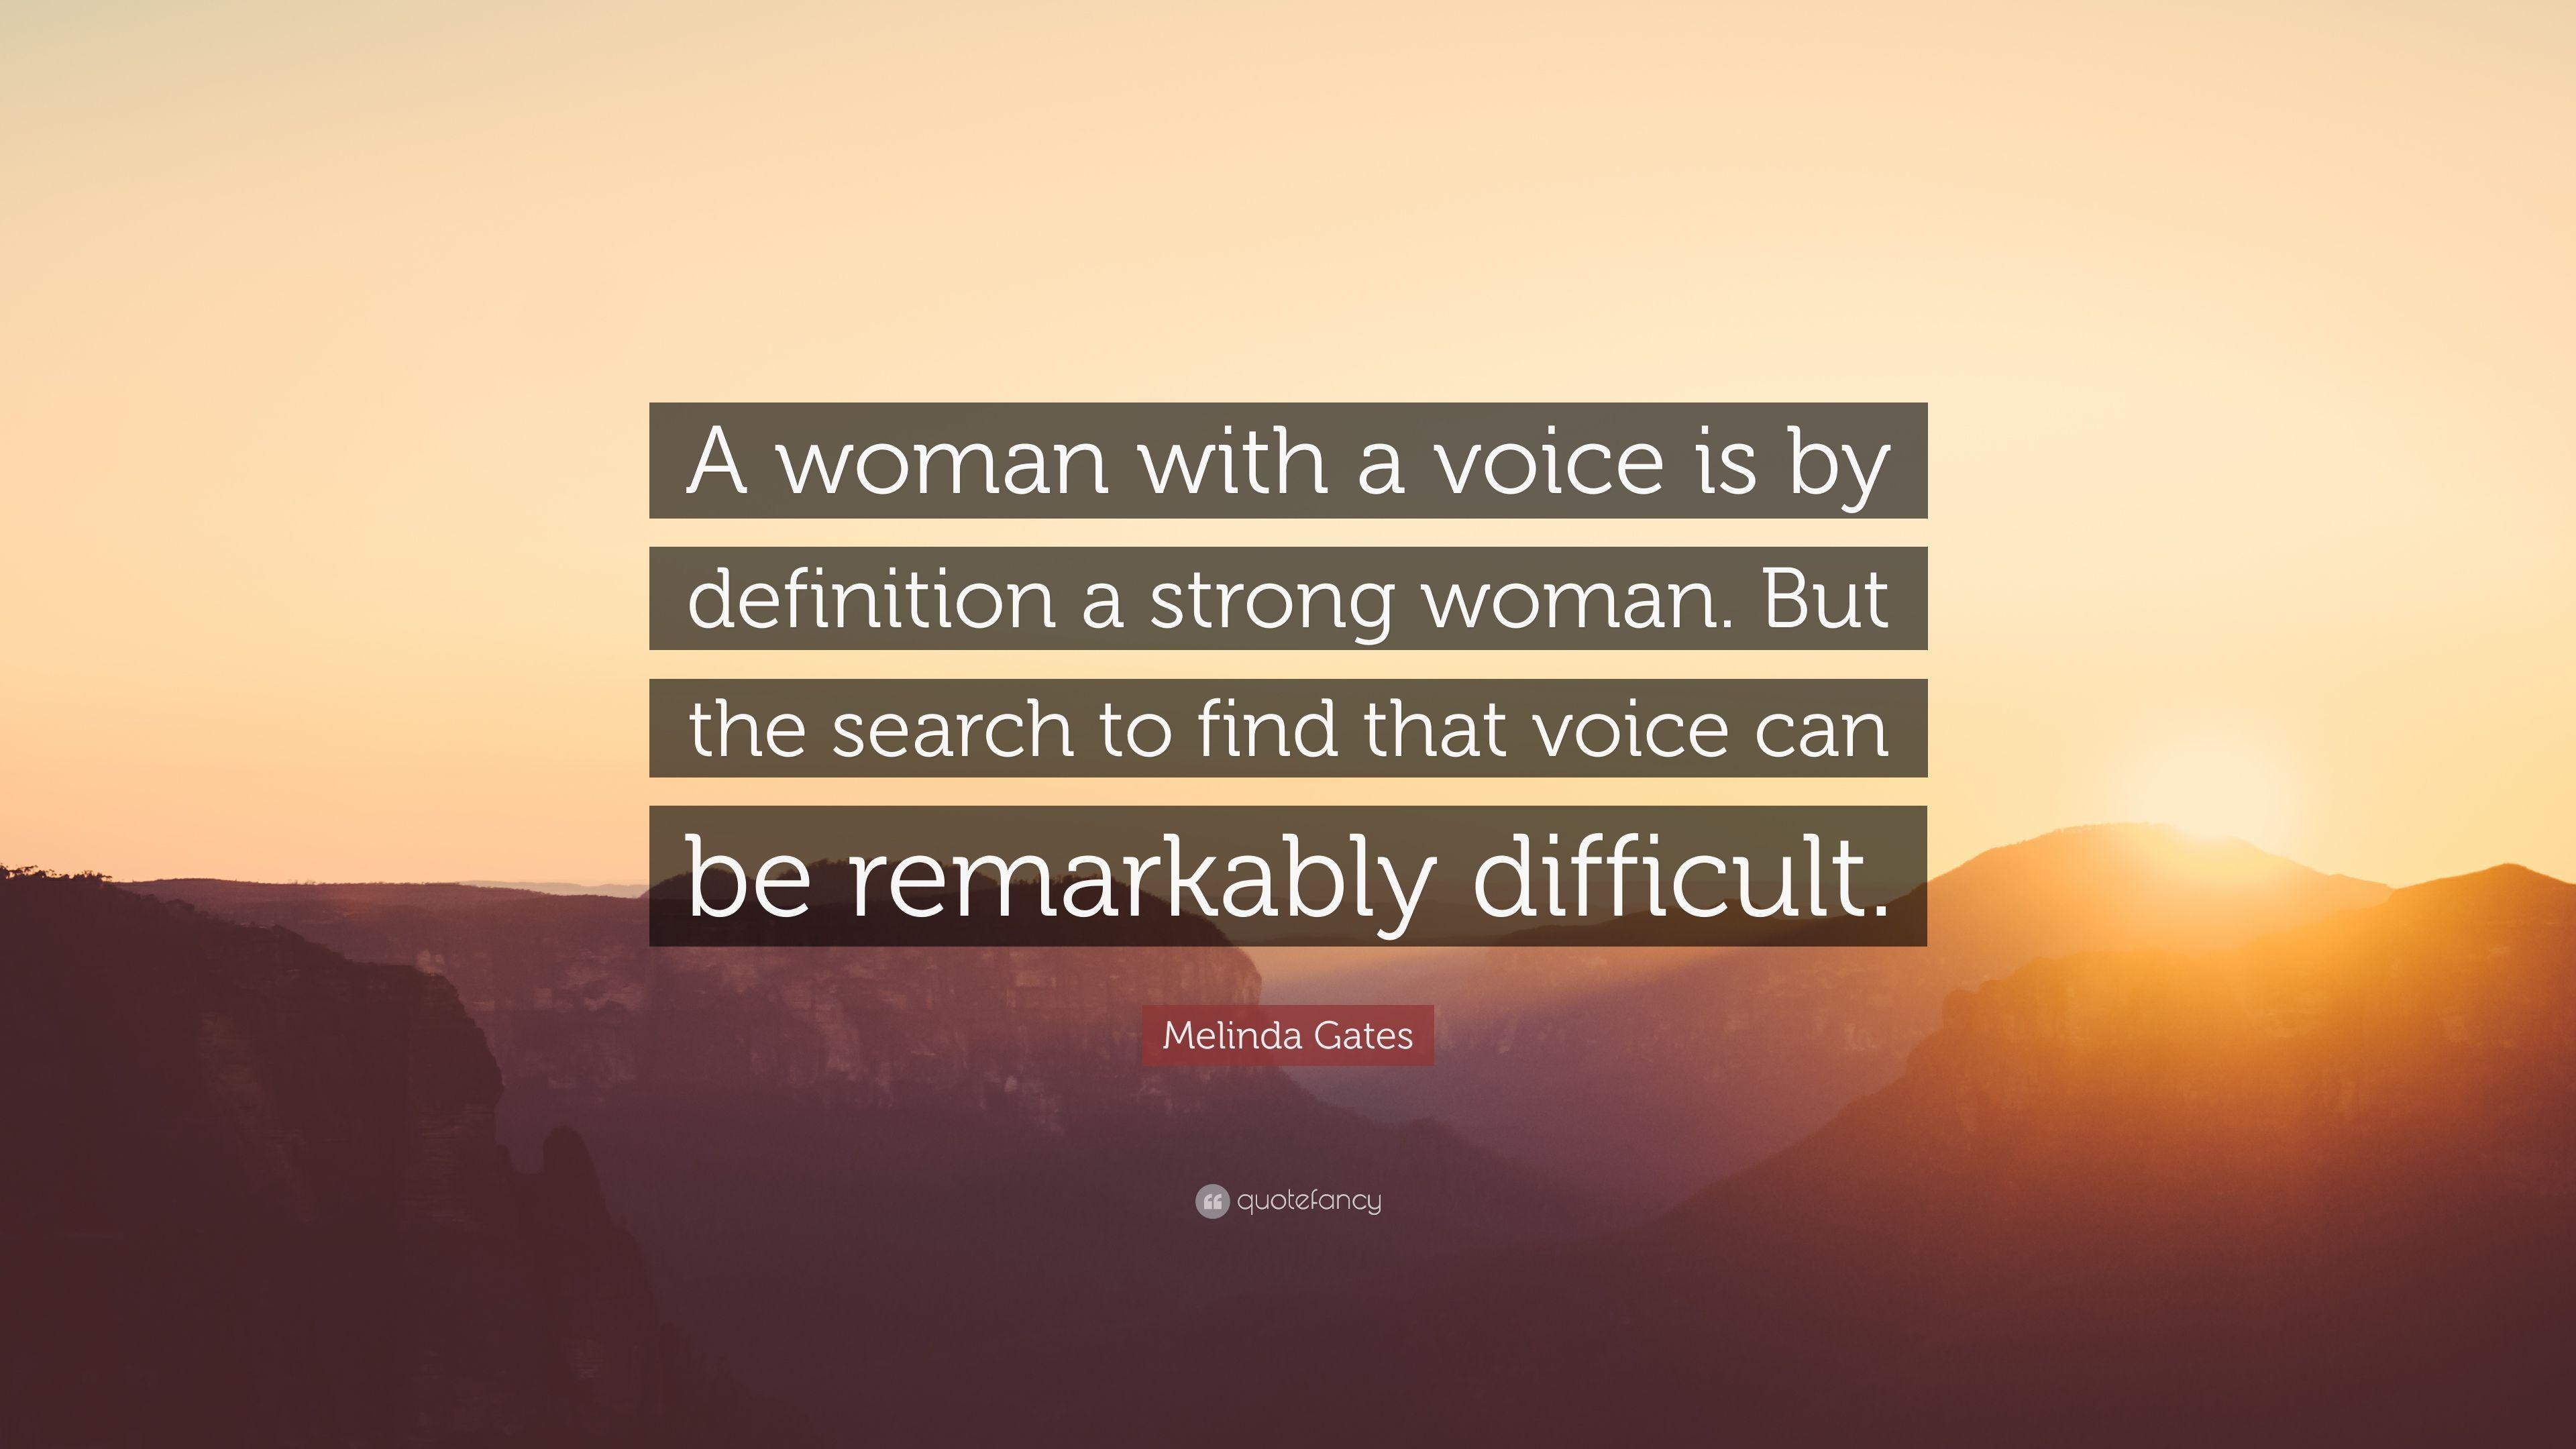 Melinda Gates Quote: “A woman with a voice is by definition a strong